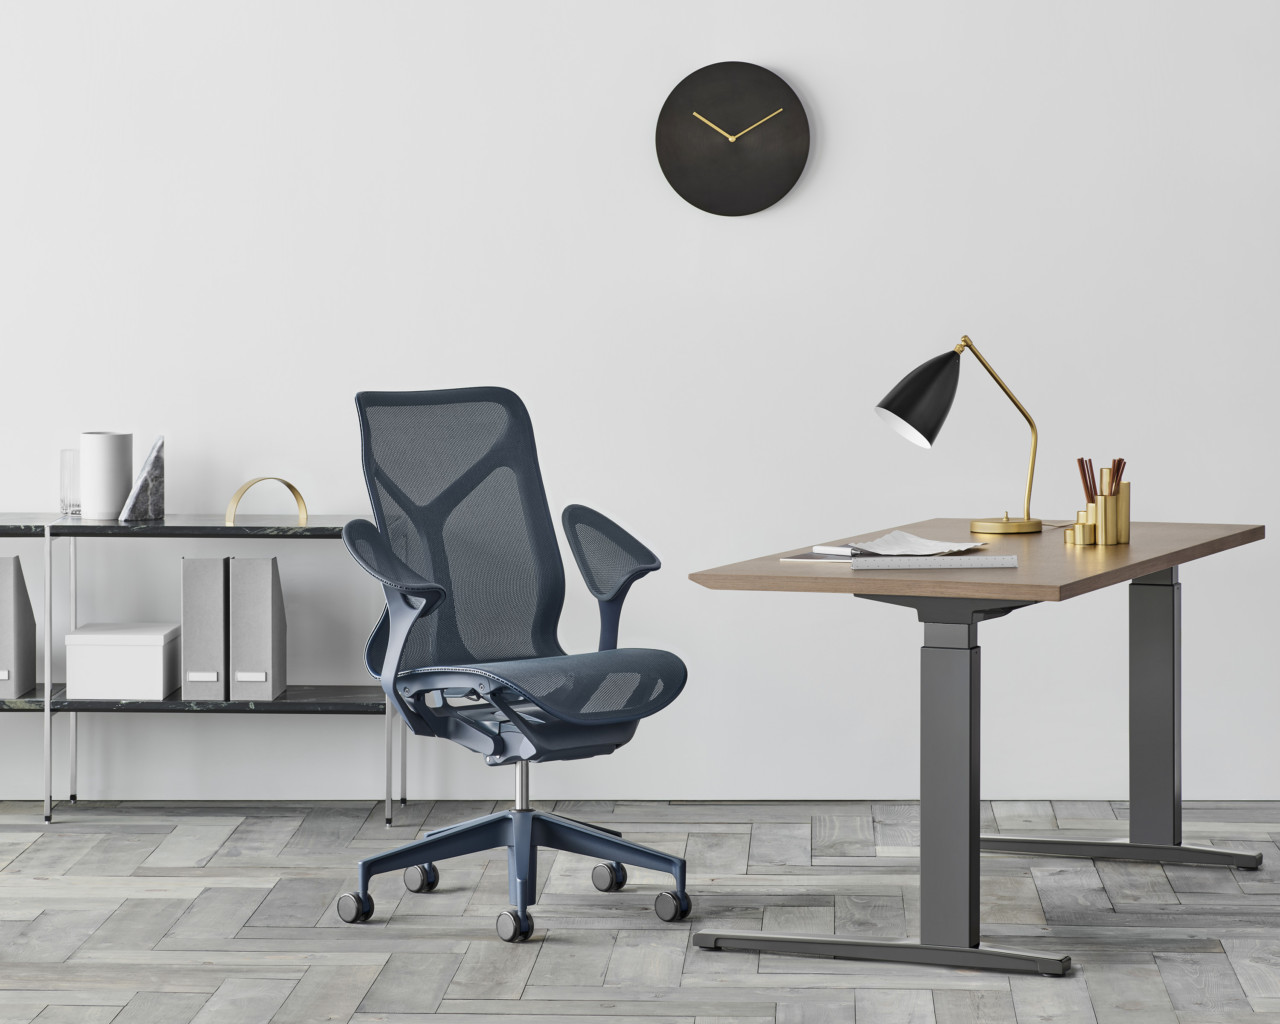 The Herman Miller Cosm Tilts Itself Into the Best Position Possible